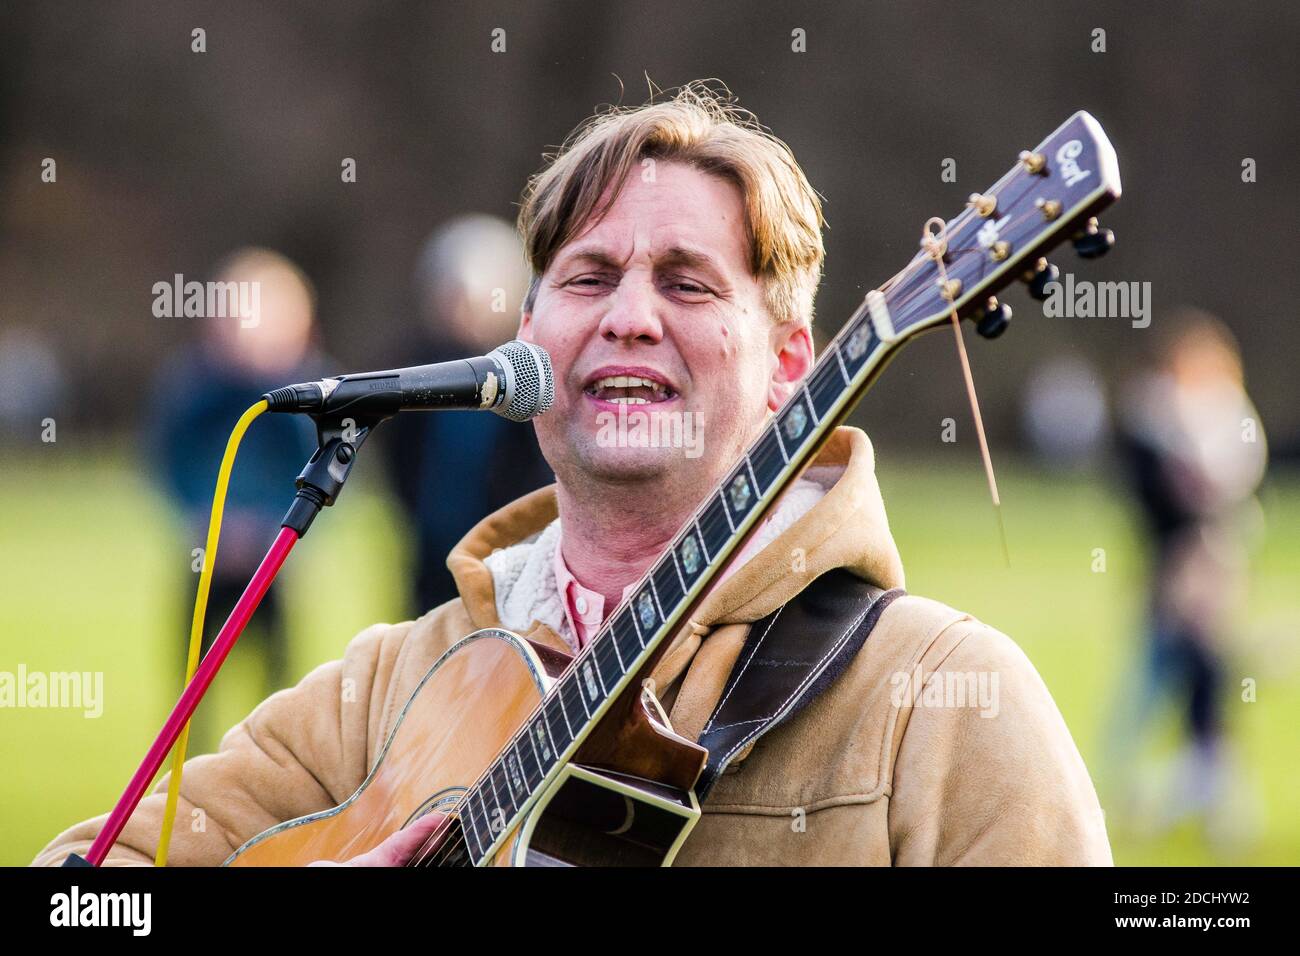 Munich, Bavaria, Germany. 21st Nov, 2020. Christian Stockmann of Christen im Widerstand sings at a corona rebel ''church service''. Bypassing a ban on ''Hygienedemos'' in Munich, the Coronarebels organized as a church service (Gottesdienst) that ultimately took place in the English Garden. The event was organized by multi-activist Frank Winkler who is associated with animal rights groups as well as Parents for Future, but more recently has been active since the beginning of the Corona conspiracy theory and anti-mask demonstrations, now moving up to the core of the organizational structure Stock Photo